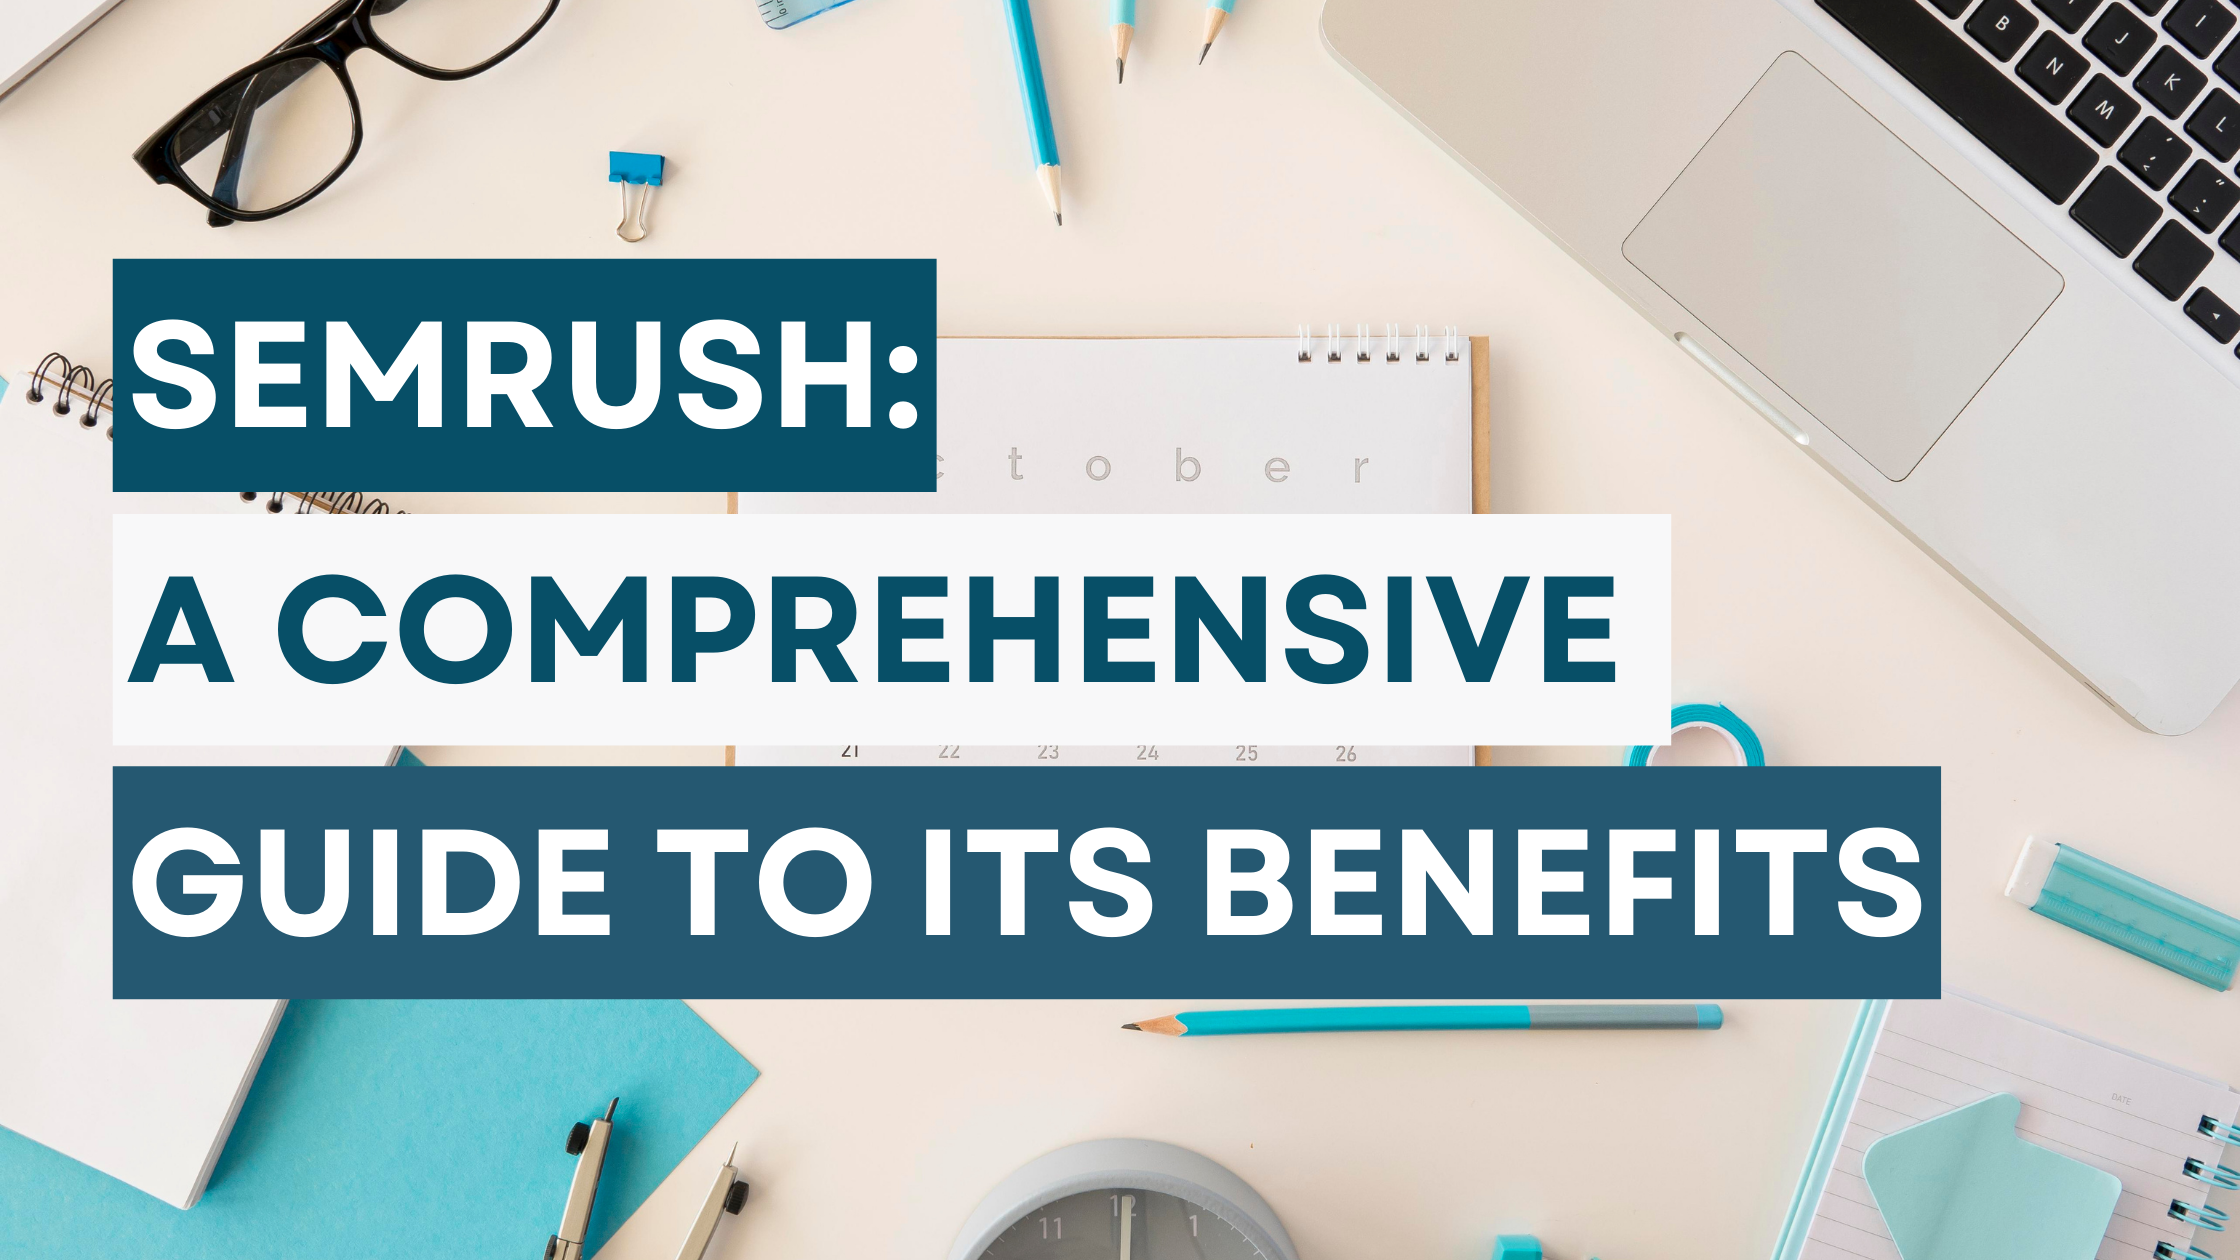 semrush a comprehensive guide to its benefits